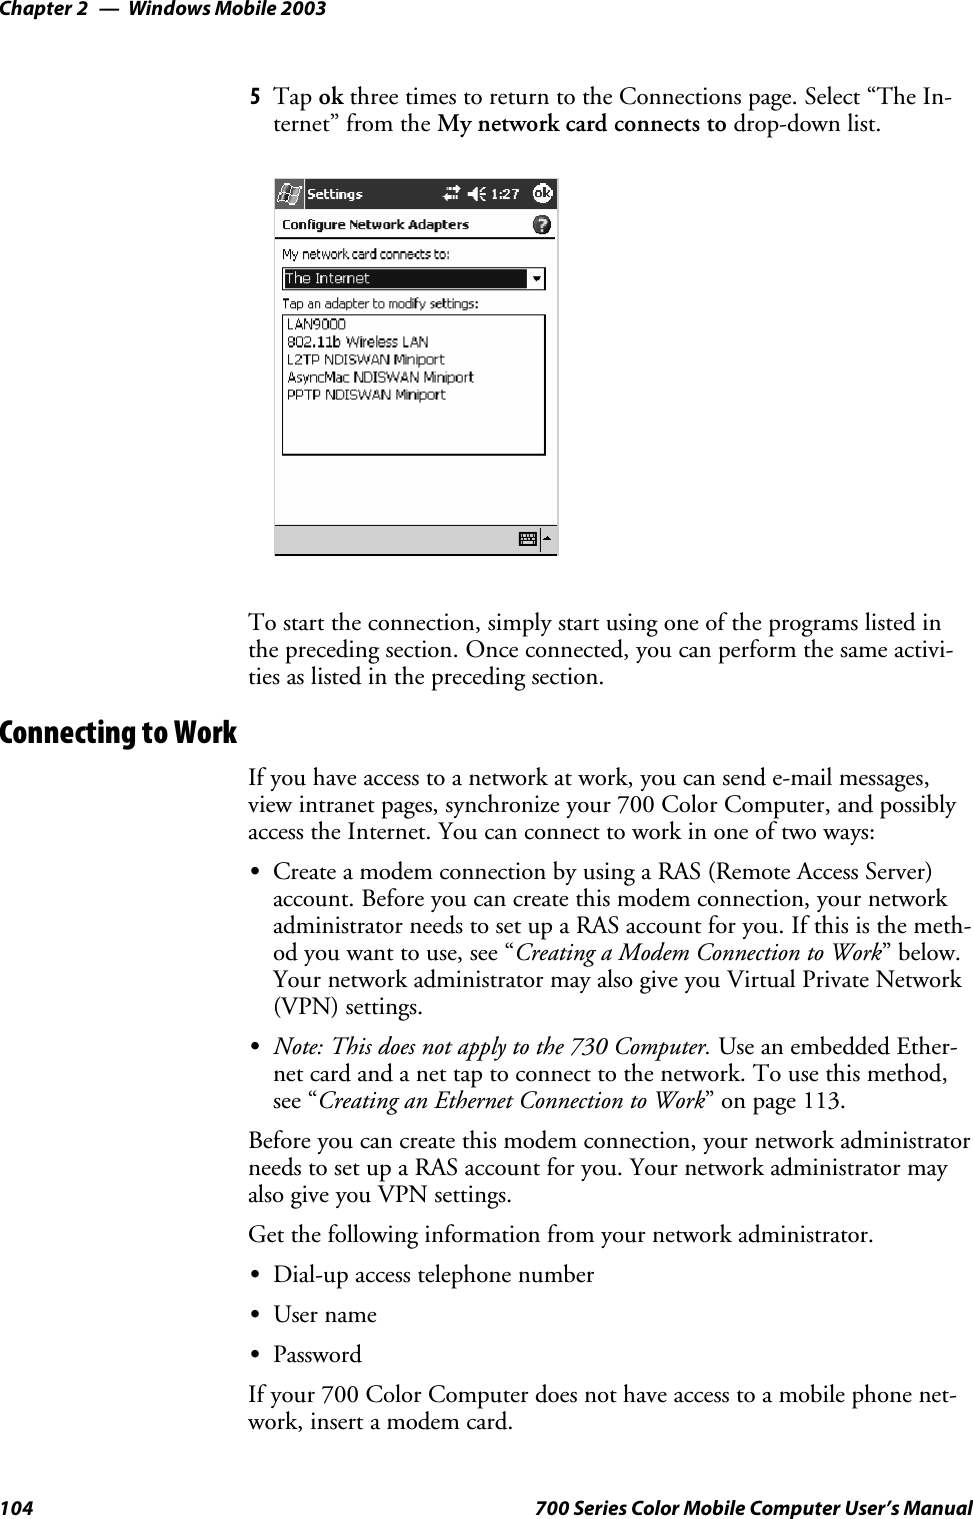 Windows Mobile 2003Chapter —2104 700 Series Color Mobile Computer User’s Manual5Tap ok three times to return to the Connections page. Select “The In-ternet” from the My network card connects to drop-down list.To start the connection, simply start using one of the programs listed inthe preceding section. Once connected, you can perform the same activi-ties as listed in the preceding section.Connecting to WorkIf you have access to a network at work, you can send e-mail messages,view intranet pages, synchronize your 700 Color Computer, and possiblyaccess the Internet. You can connect to work in one of two ways:SCreate a modem connection by using a RAS (Remote Access Server)account. Before you can create this modem connection, your networkadministrator needs to set up a RAS account for you. If this is the meth-od you want to use, see “Creating a Modem Connection to Work”below.Your network administrator may also give you Virtual Private Network(VPN) settings.SNote: This does not apply to the 730 Computer. Use an embedded Ether-net card and a net tap to connect to the network. To use this method,see “Creating an Ethernet Connection to Work” on page 113.Before you can create this modem connection, your network administratorneeds to set up a RAS account for you. Your network administrator mayalso give you VPN settings.Get the following information from your network administrator.SDial-up access telephone numberSUser nameSPasswordIf your 700 Color Computer does not have access to a mobile phone net-work,insertamodemcard.